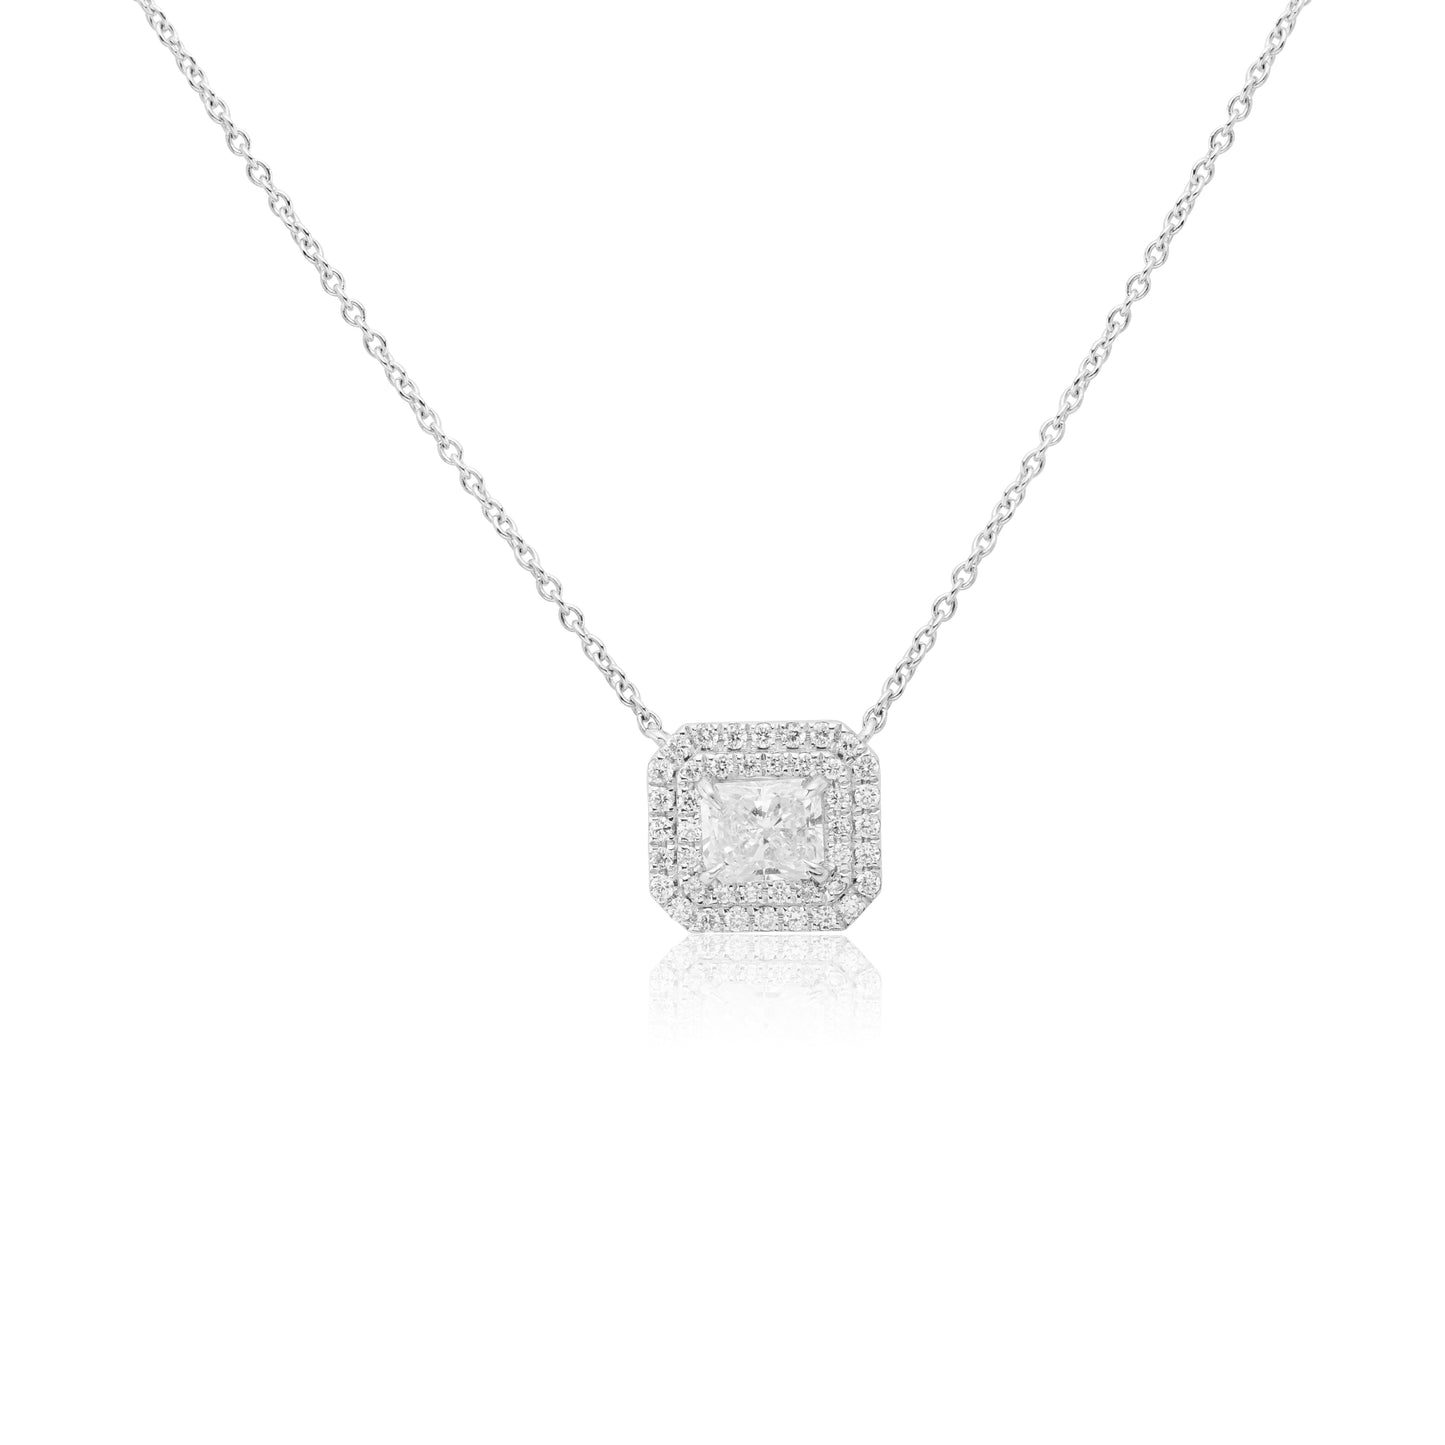 White Gold Necklaces Double Halo Pendant With Radiant Cut Diamond In Center dansonjewelers Danson Jewelers 